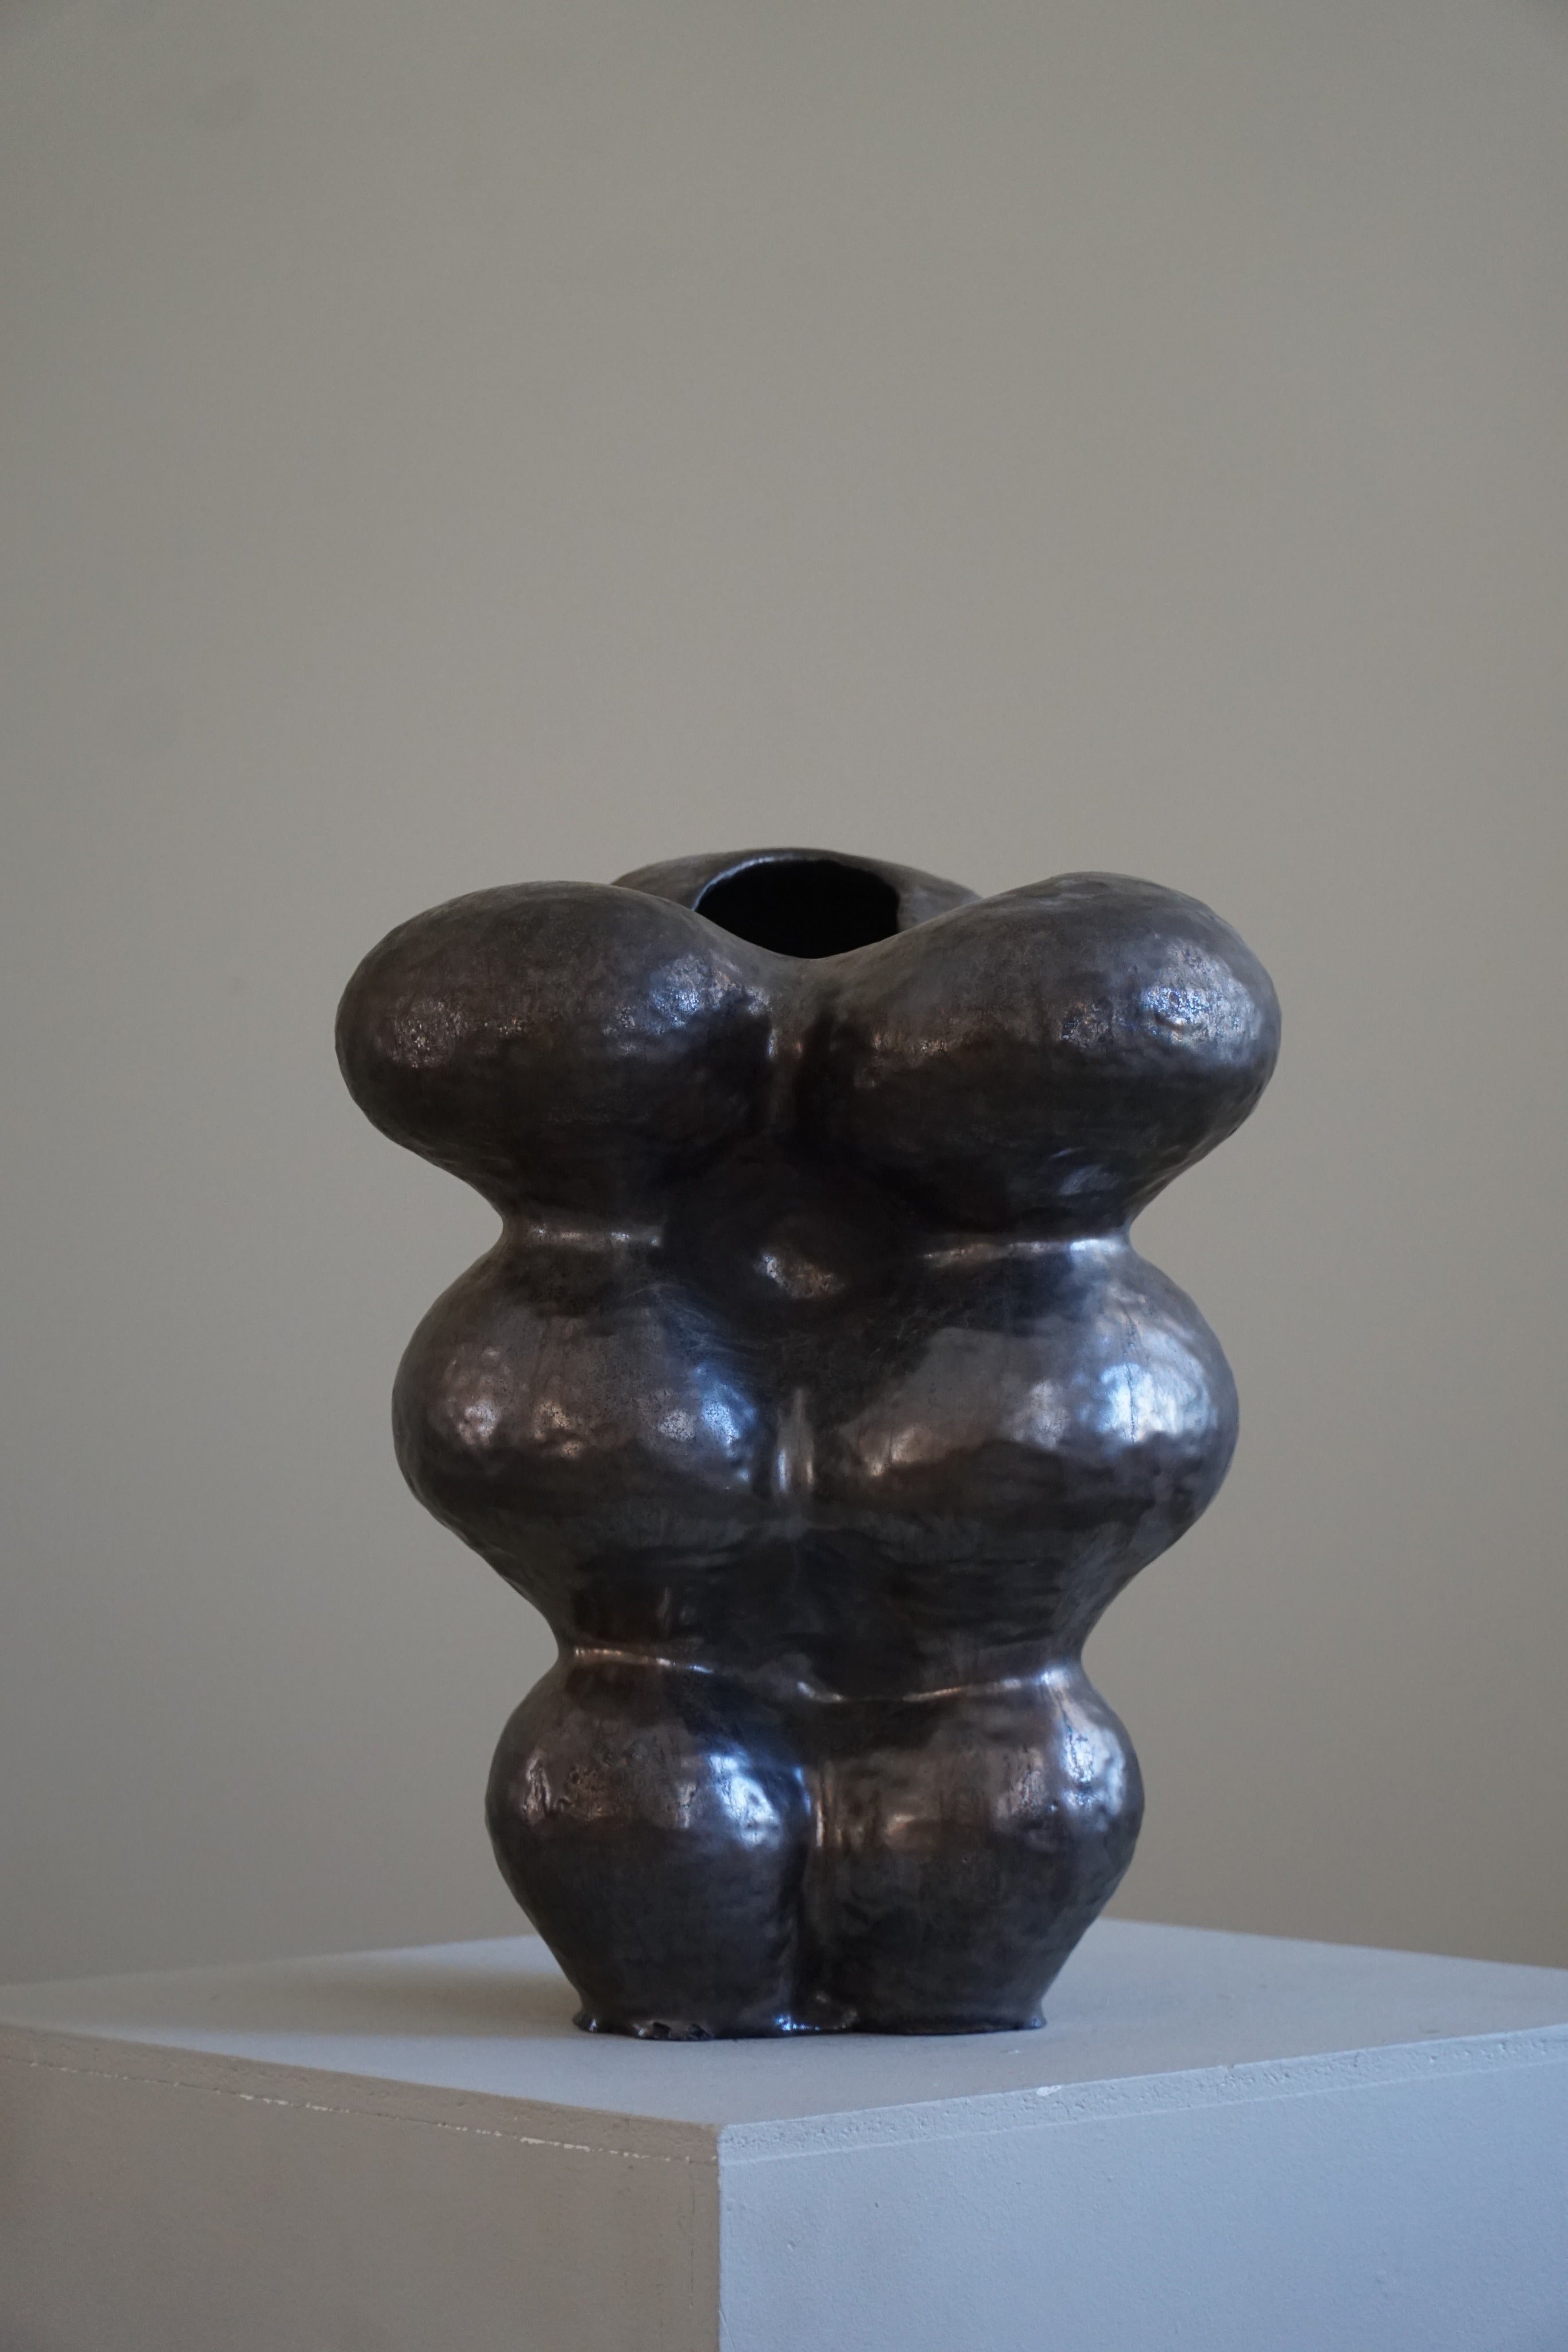 Large ceramic vase with a deep dark bronze glaze, made by Danish artist Ole Victor, 2021.

Ole Victor is a Danish artist who attended Art Academy between 1975 and 1980. He creates artworks and ceramics ever since. Hes been exhibited in Galerie 26 on